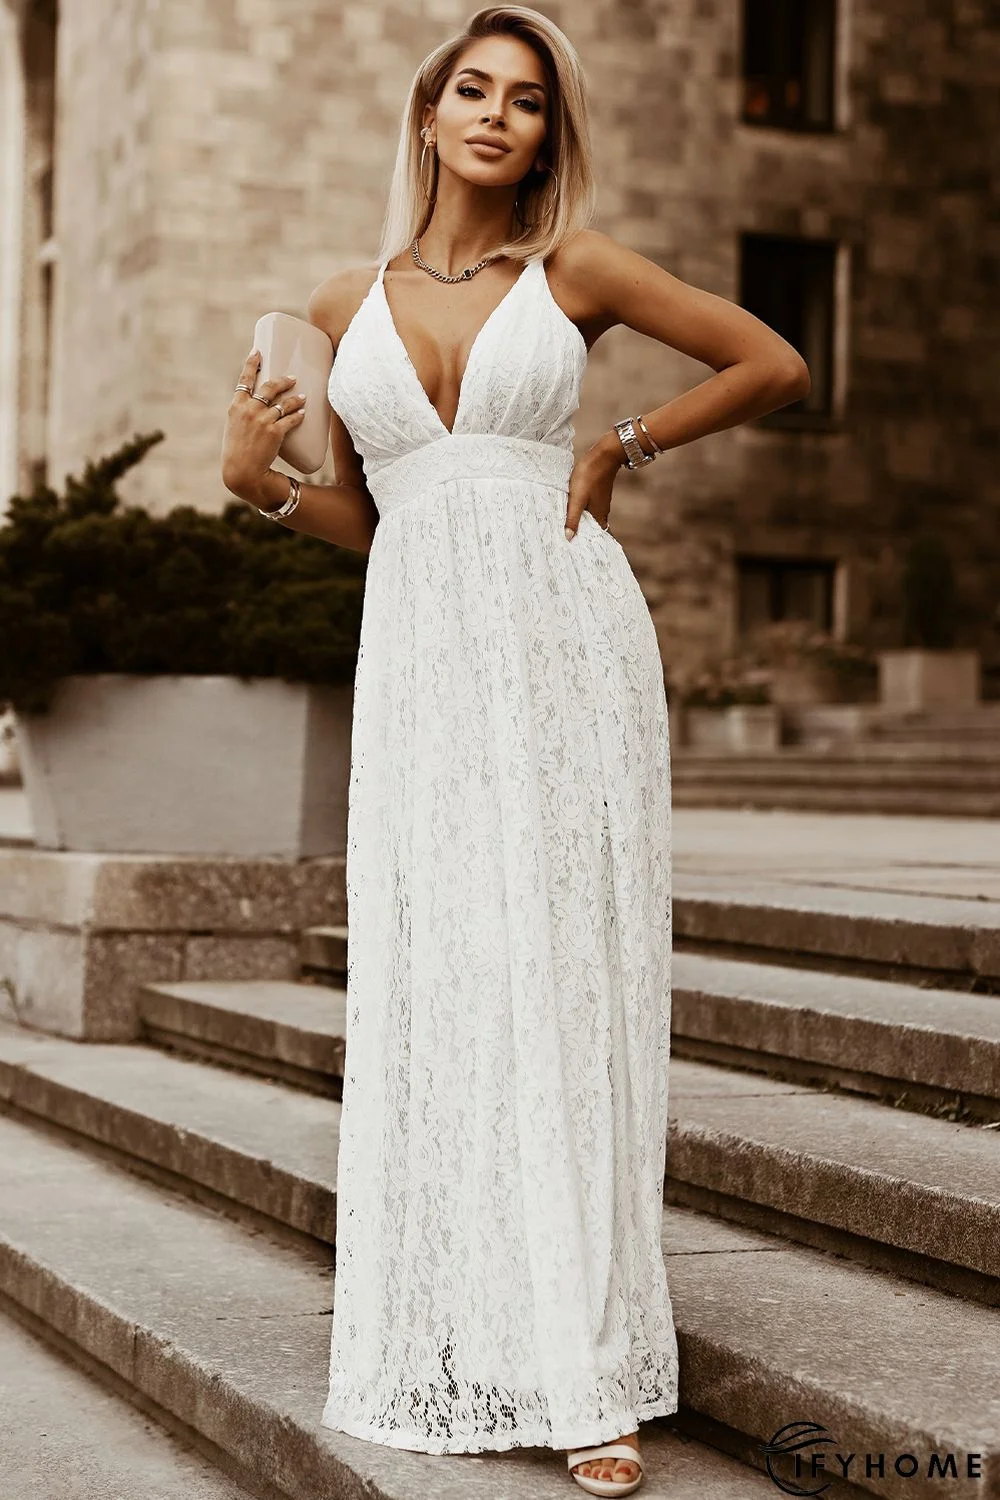 White Floral Lace Open Back Maxi Party Dress | IFYHOME